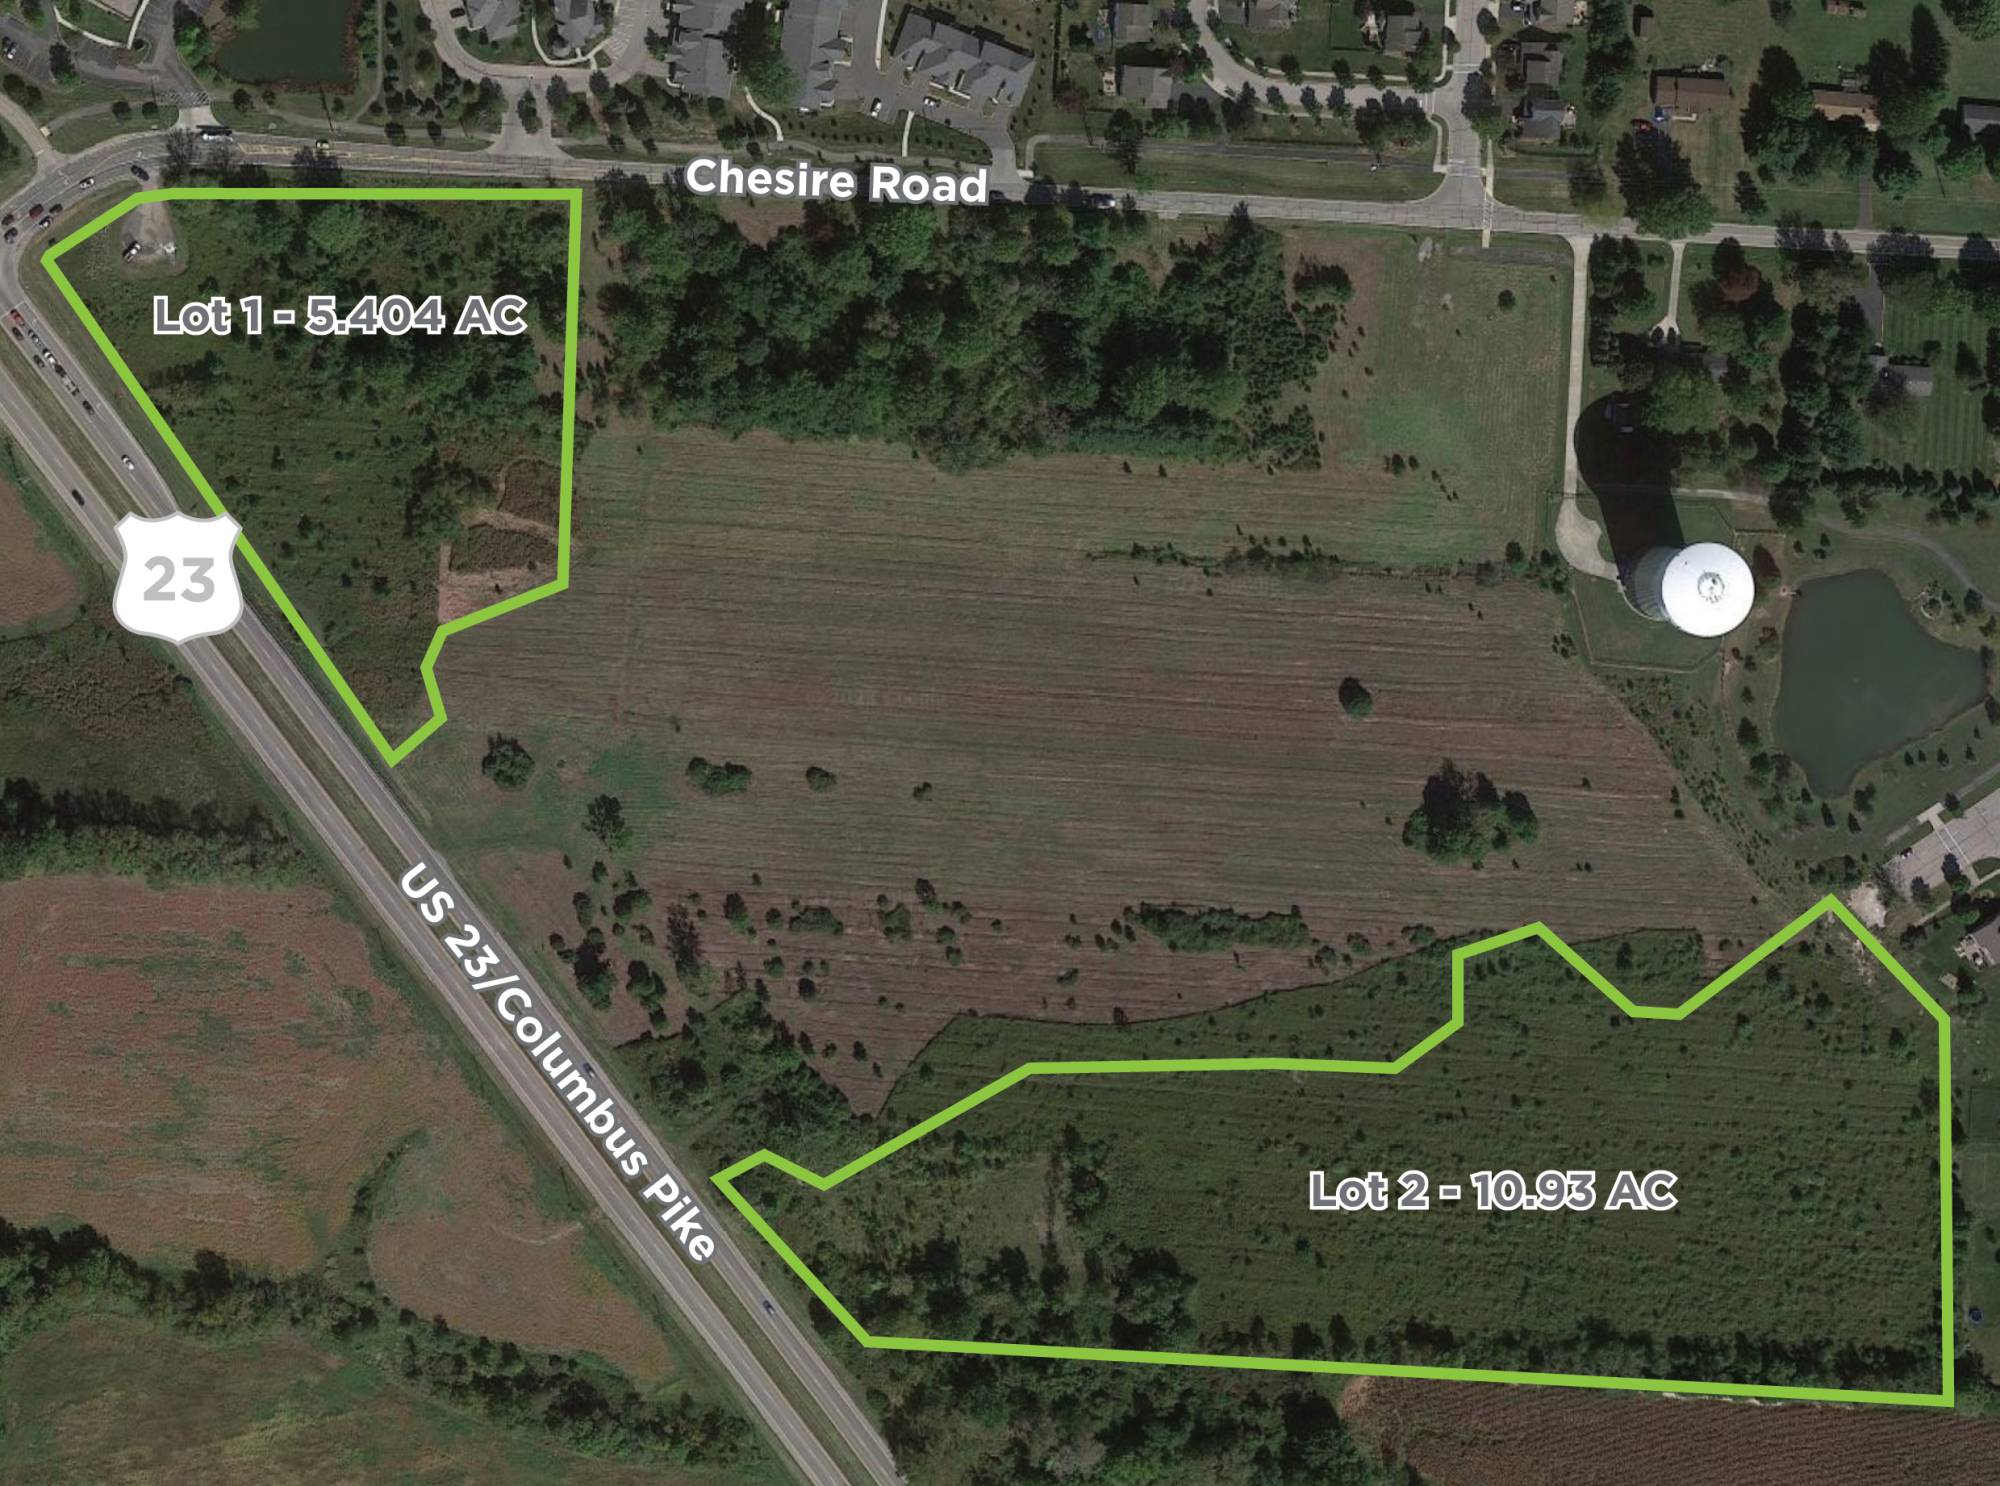 Sturges Property Group - Land For Sale Delaware Ohio Near Columbus